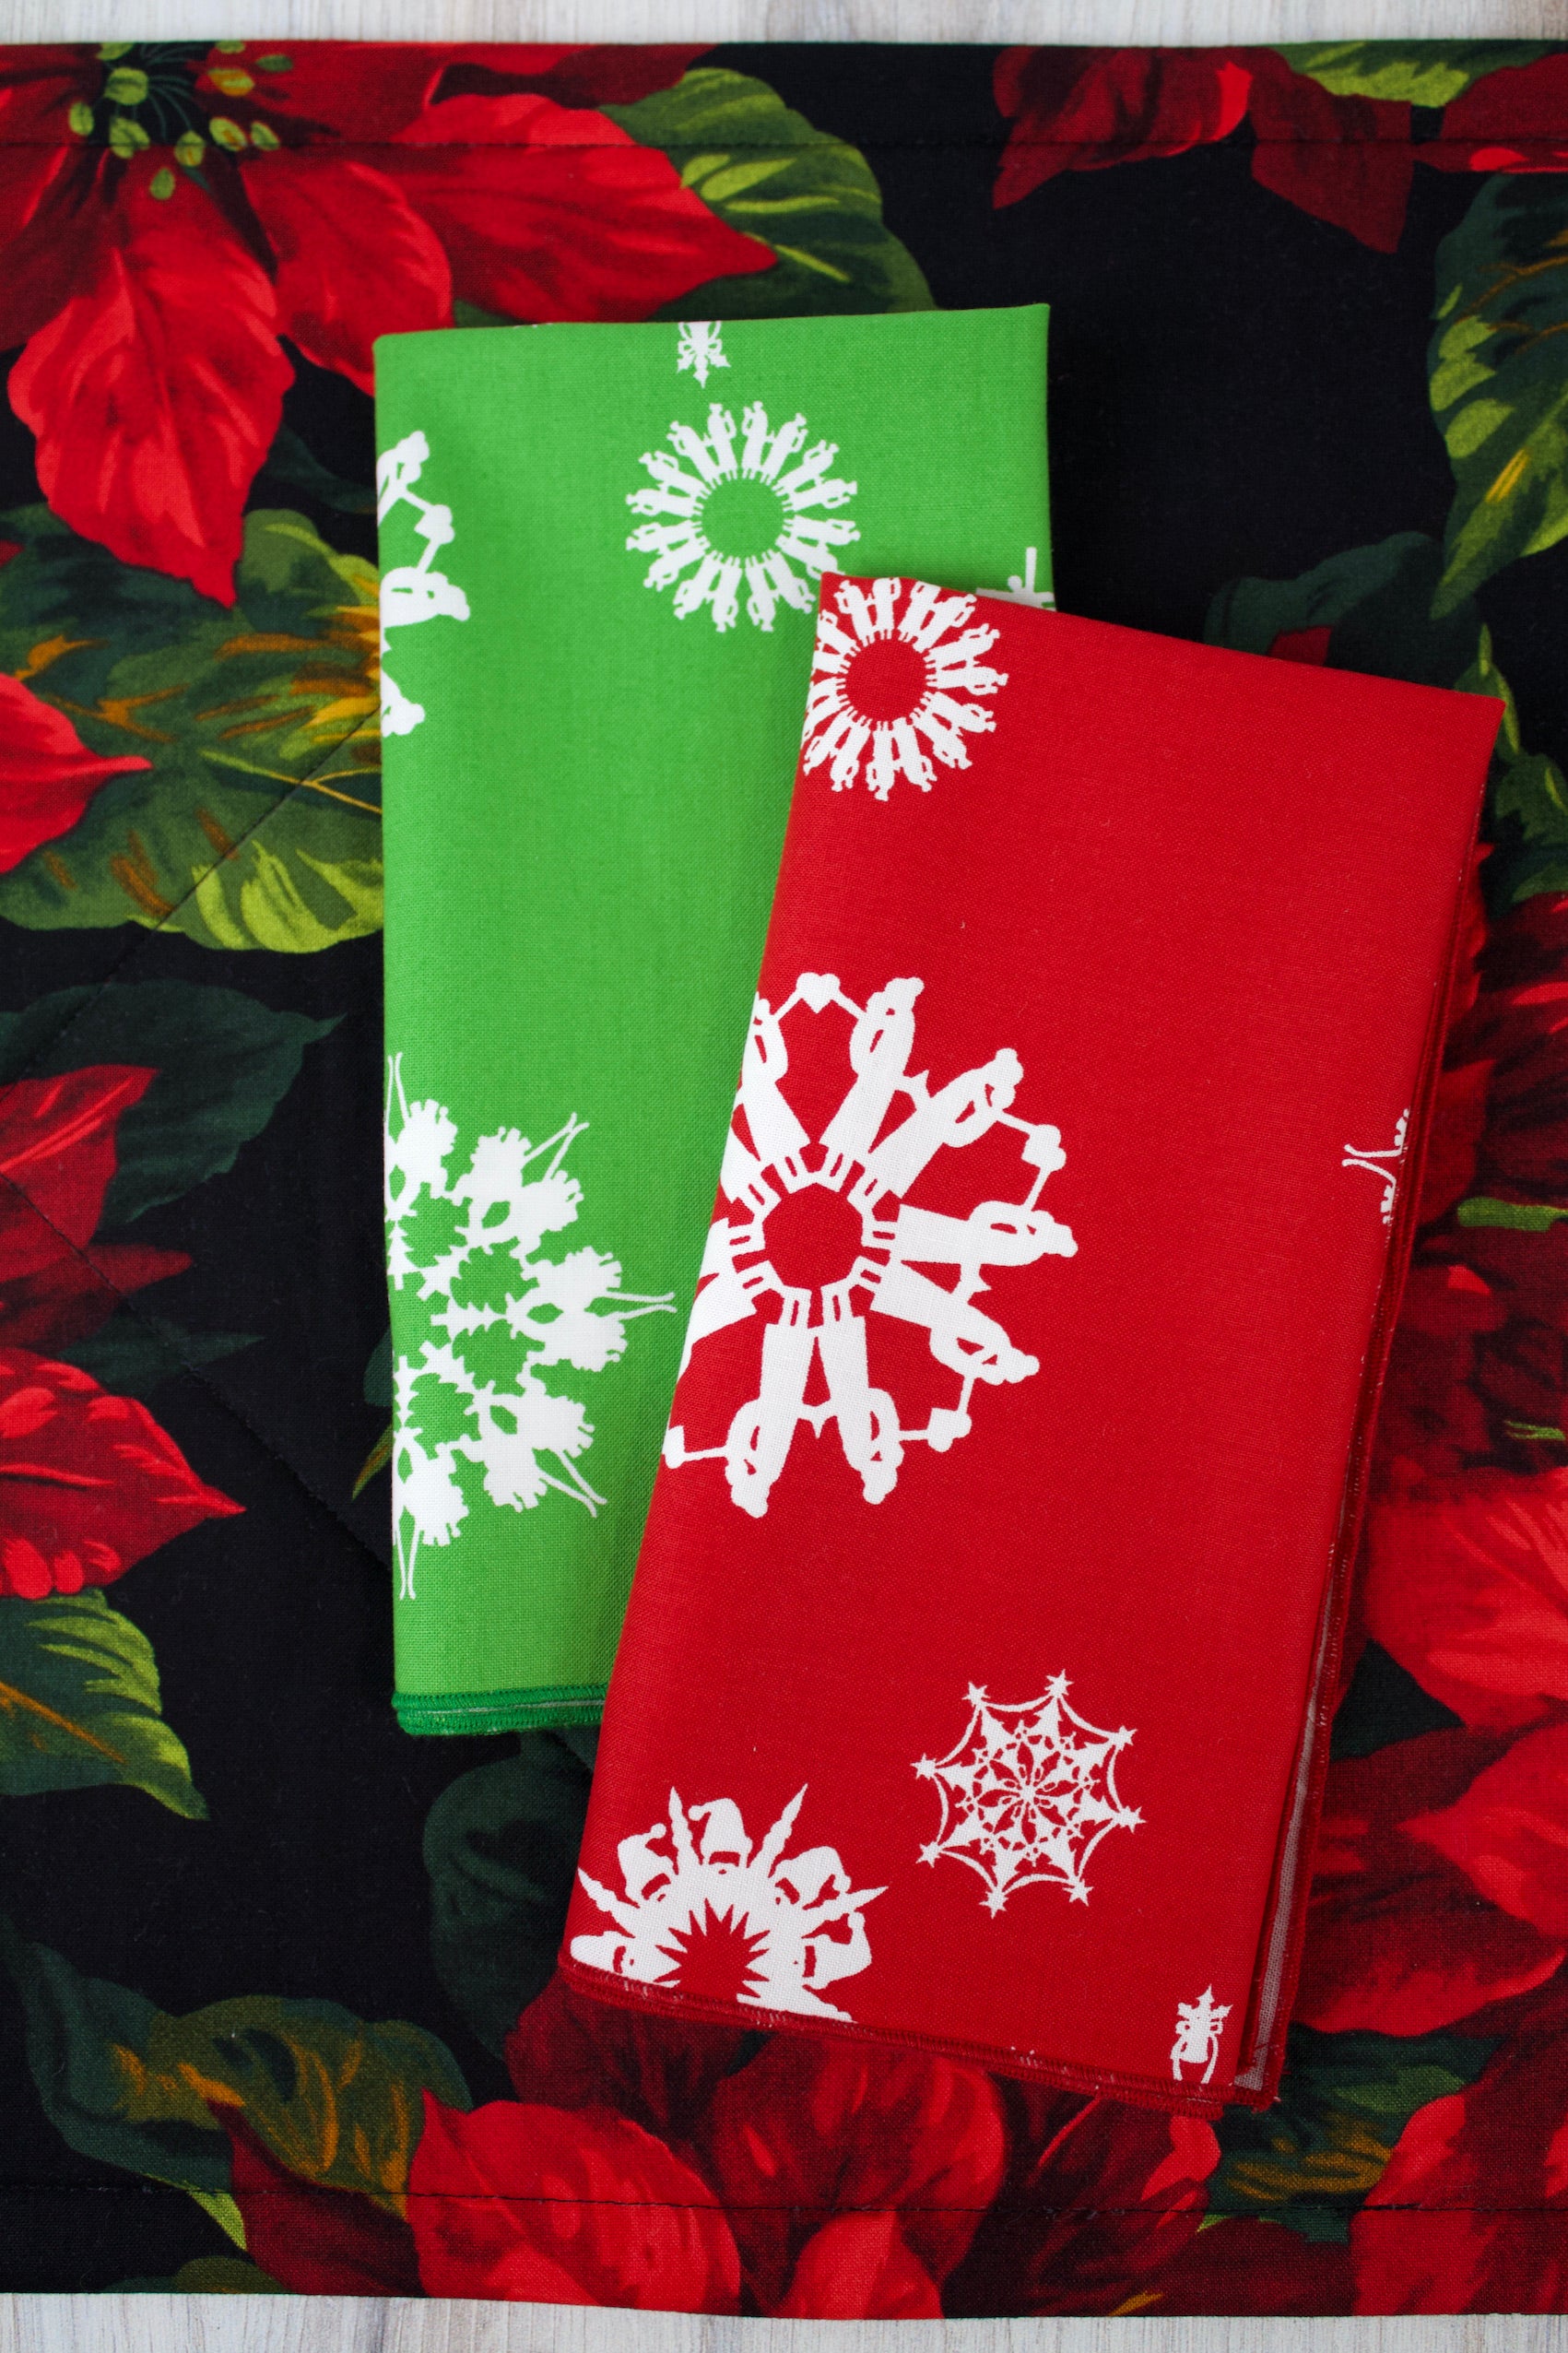 Folksy Flakes Christmas Napkins (Set of 4)-The Blue Peony-Category_Napkins,Category_Table Linens,Color_Green,Color_Red,Department_Kitchen,Material_Cotton,Theme_Christmas,Theme_Winter